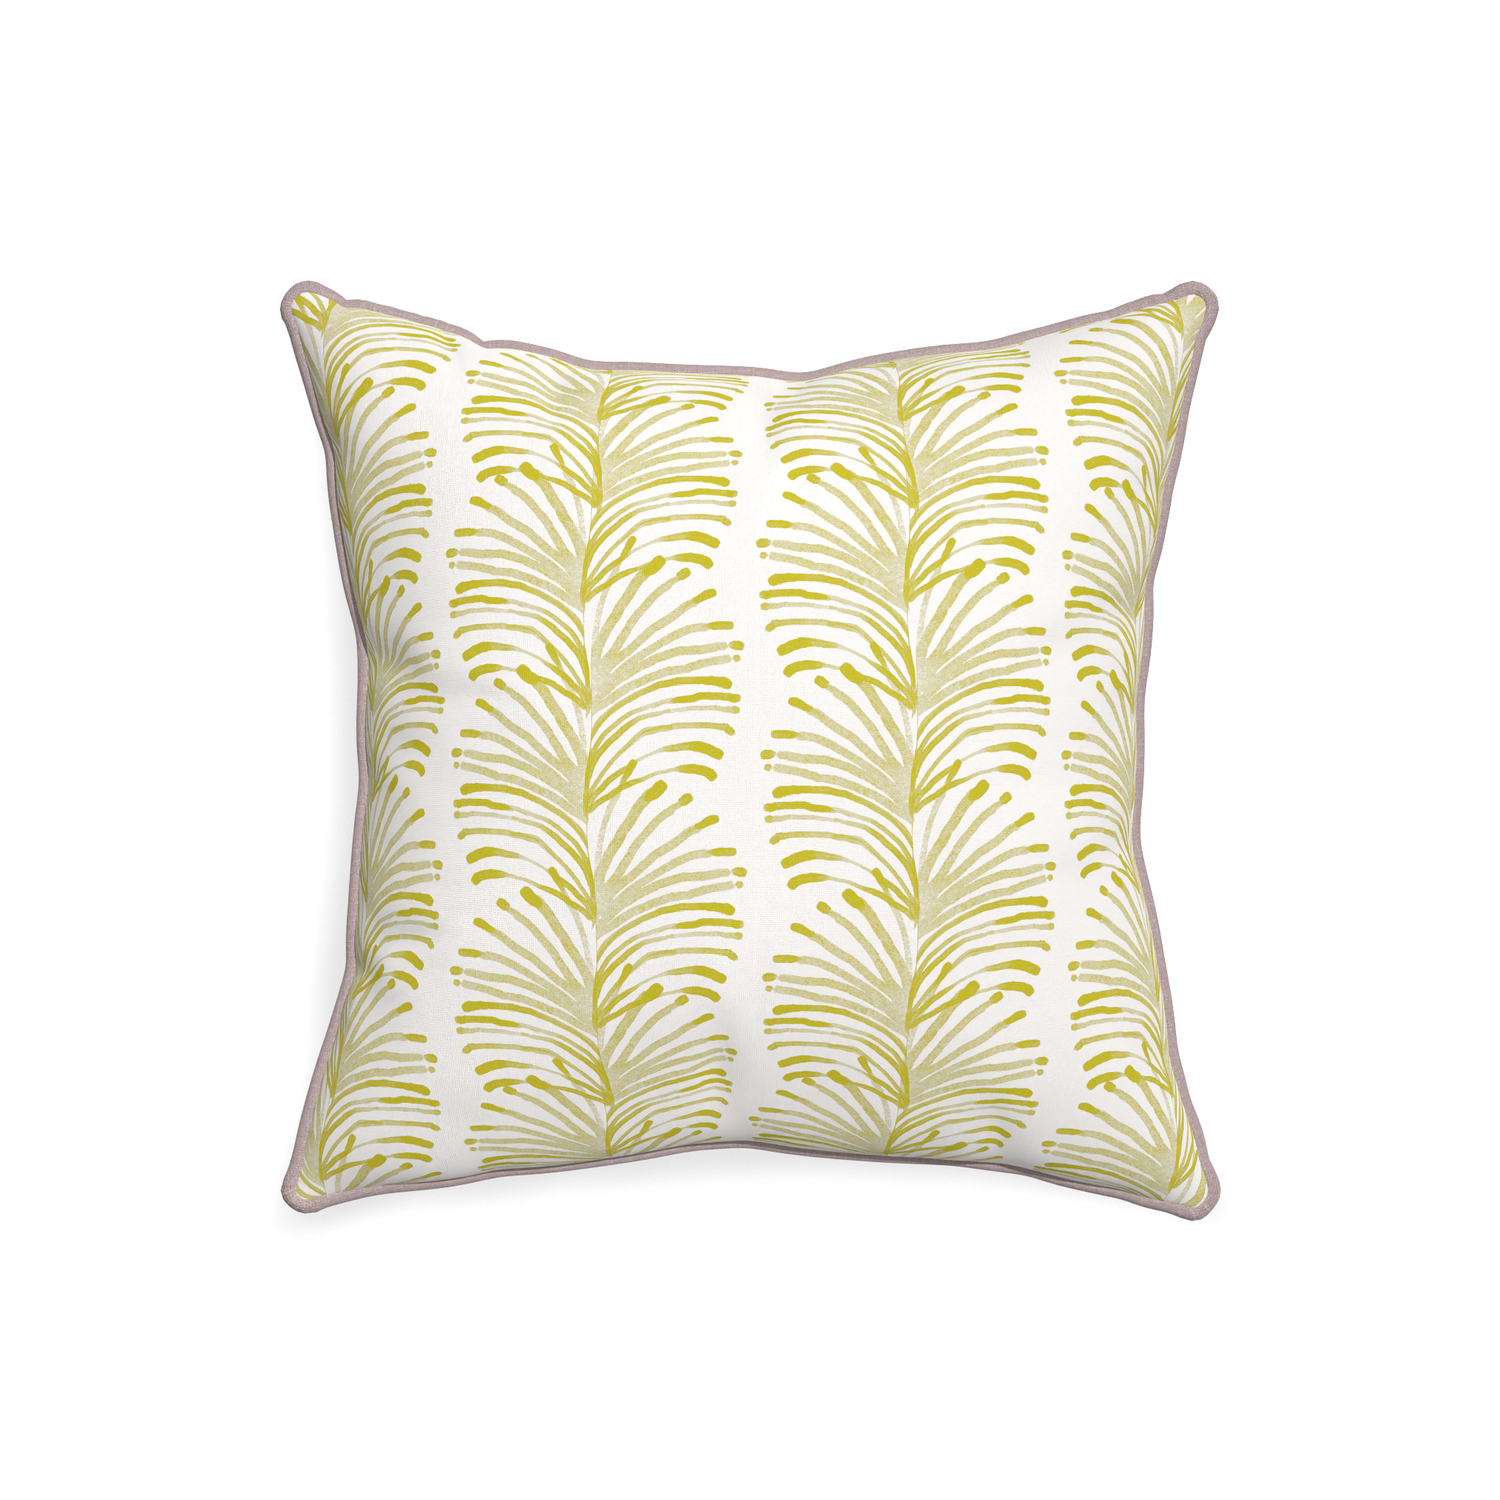 20-square emma chartreuse custom yellow stripe chartreusepillow with orchid piping on white background